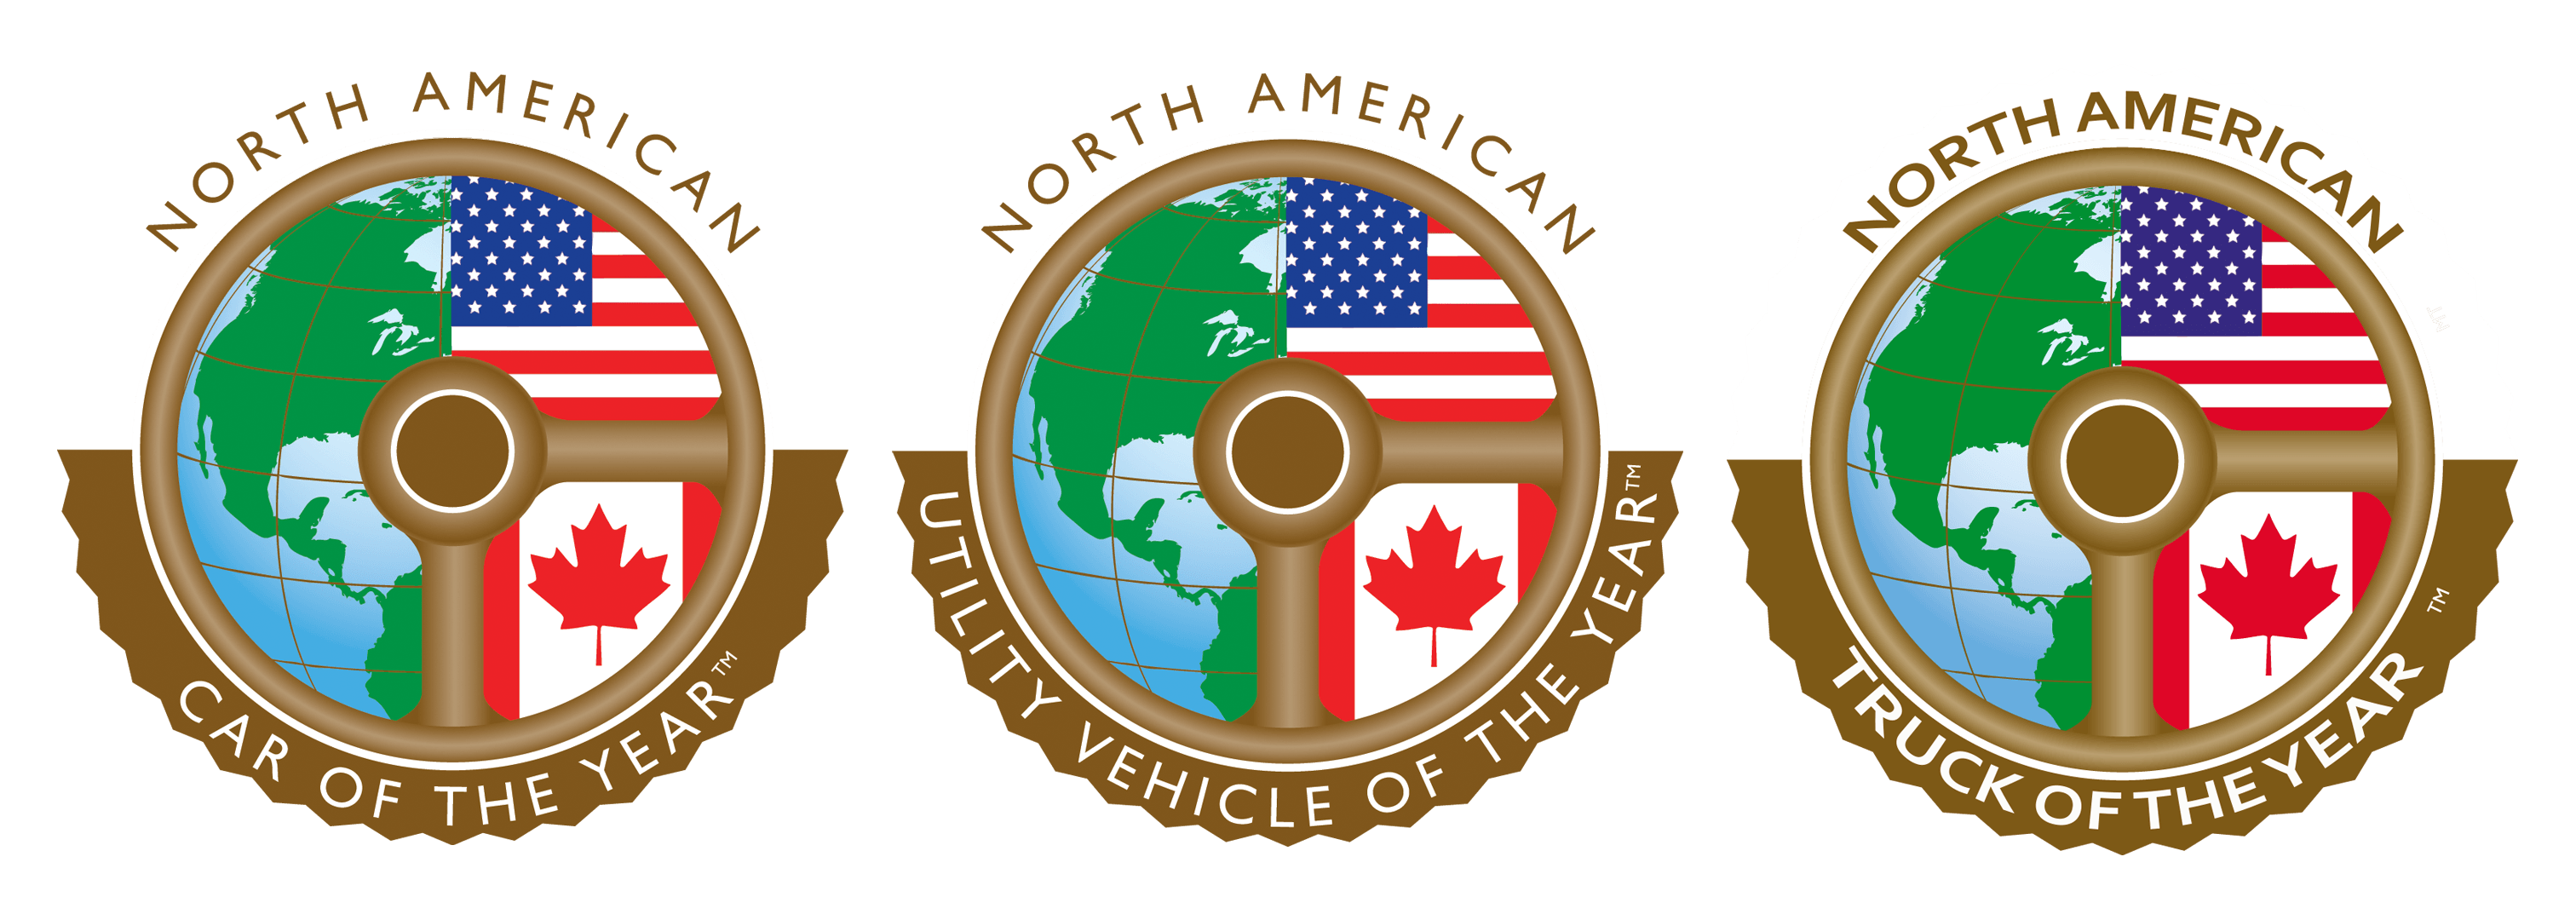 American Car Logo - 2018 North American Car Utility and Truck of the Year Winners Announced